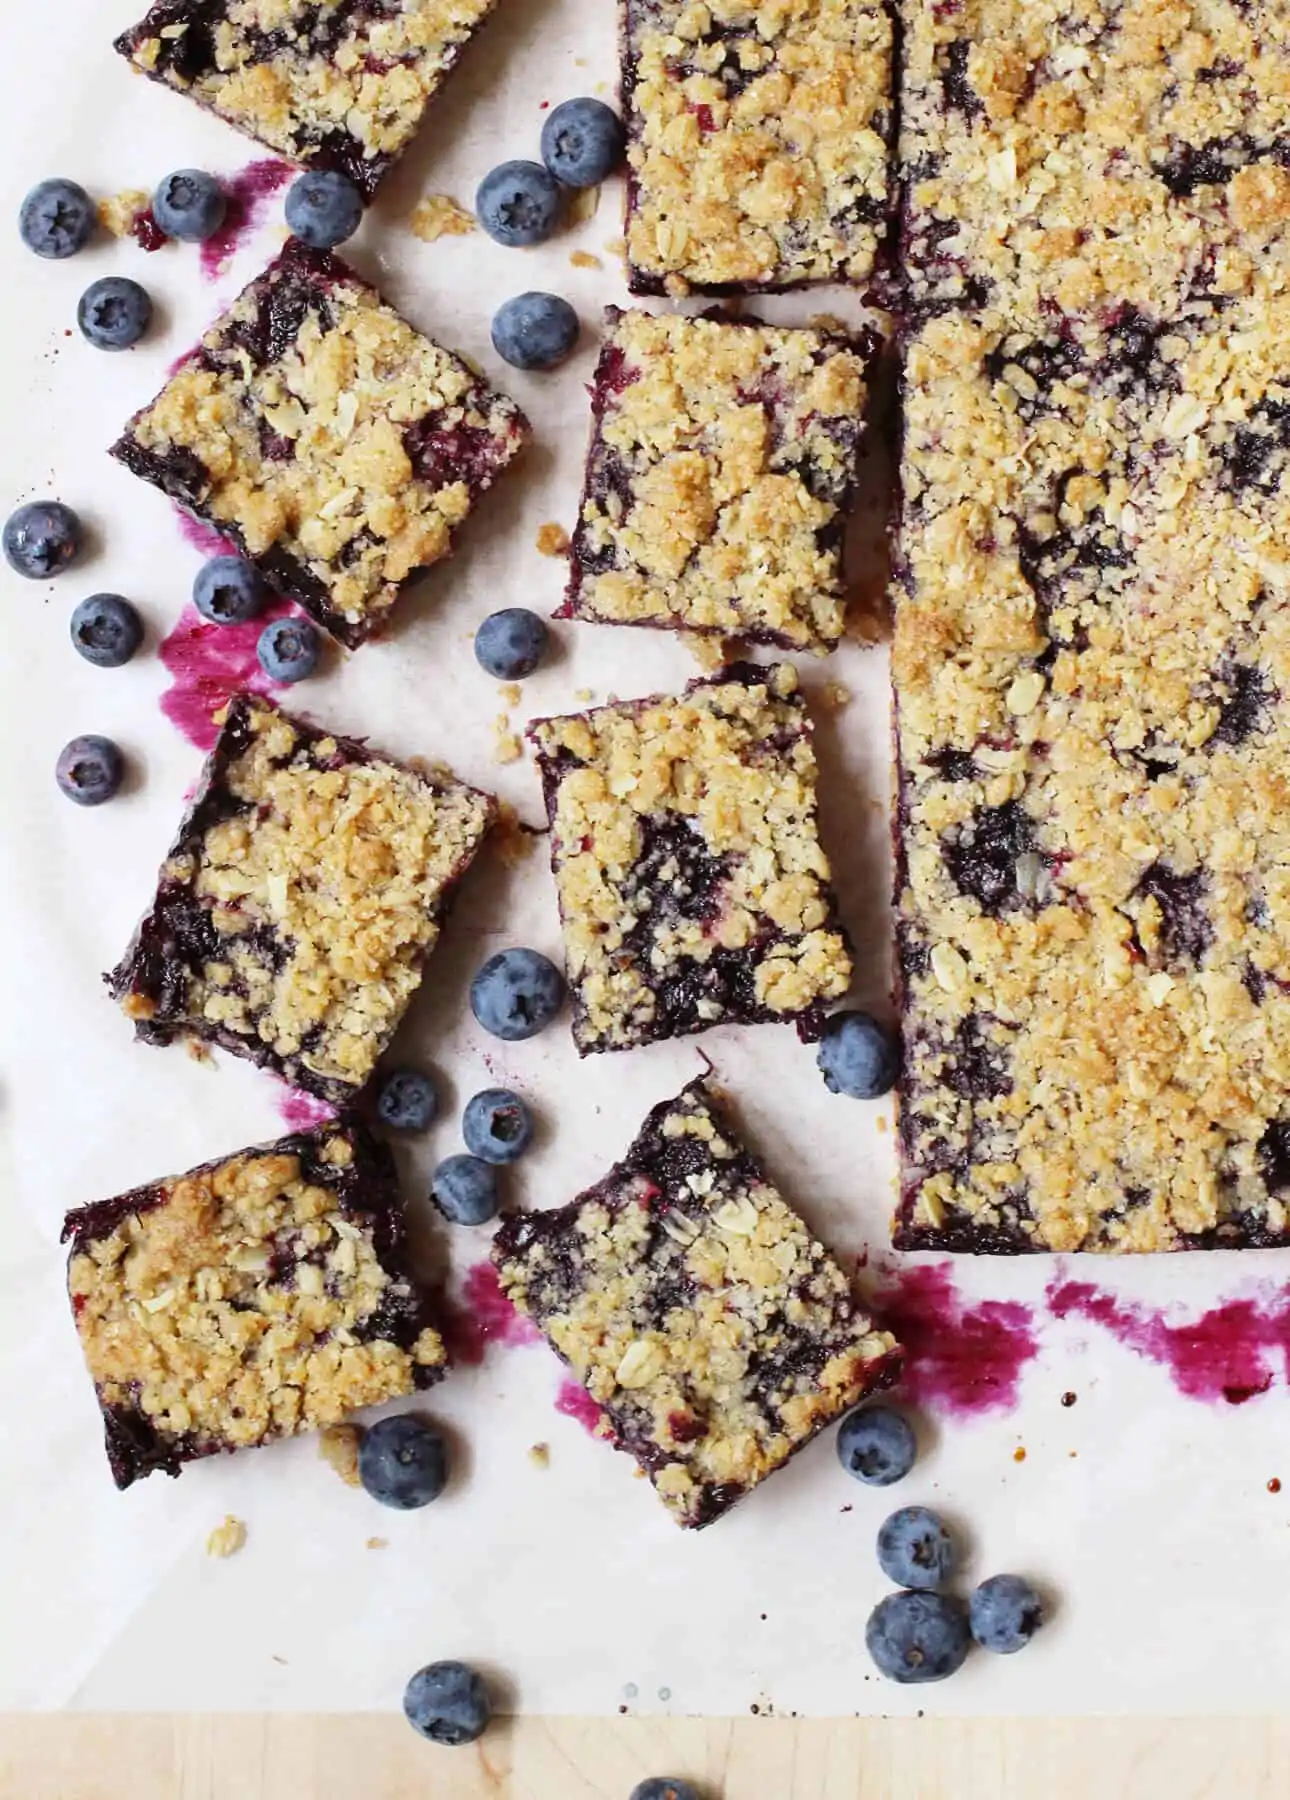 Oat and Blueberry Crumb Bars